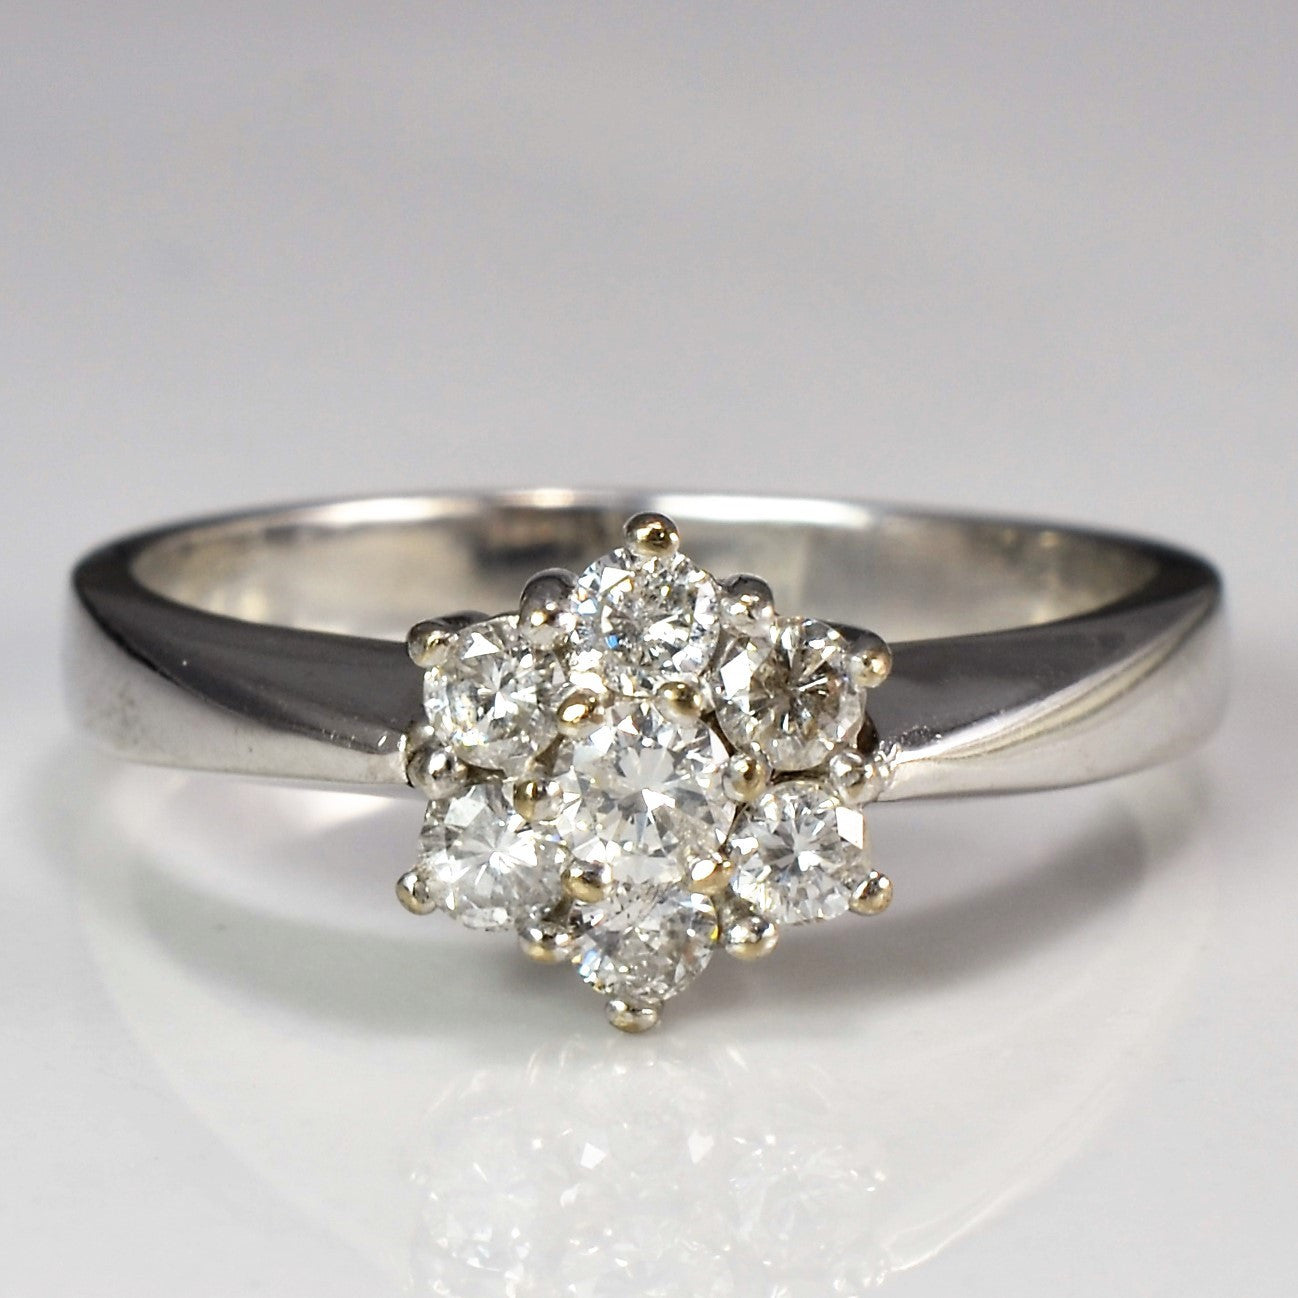 Tapered Floral Diamond Ring | 0.50 ctw, SZ 8.5 |